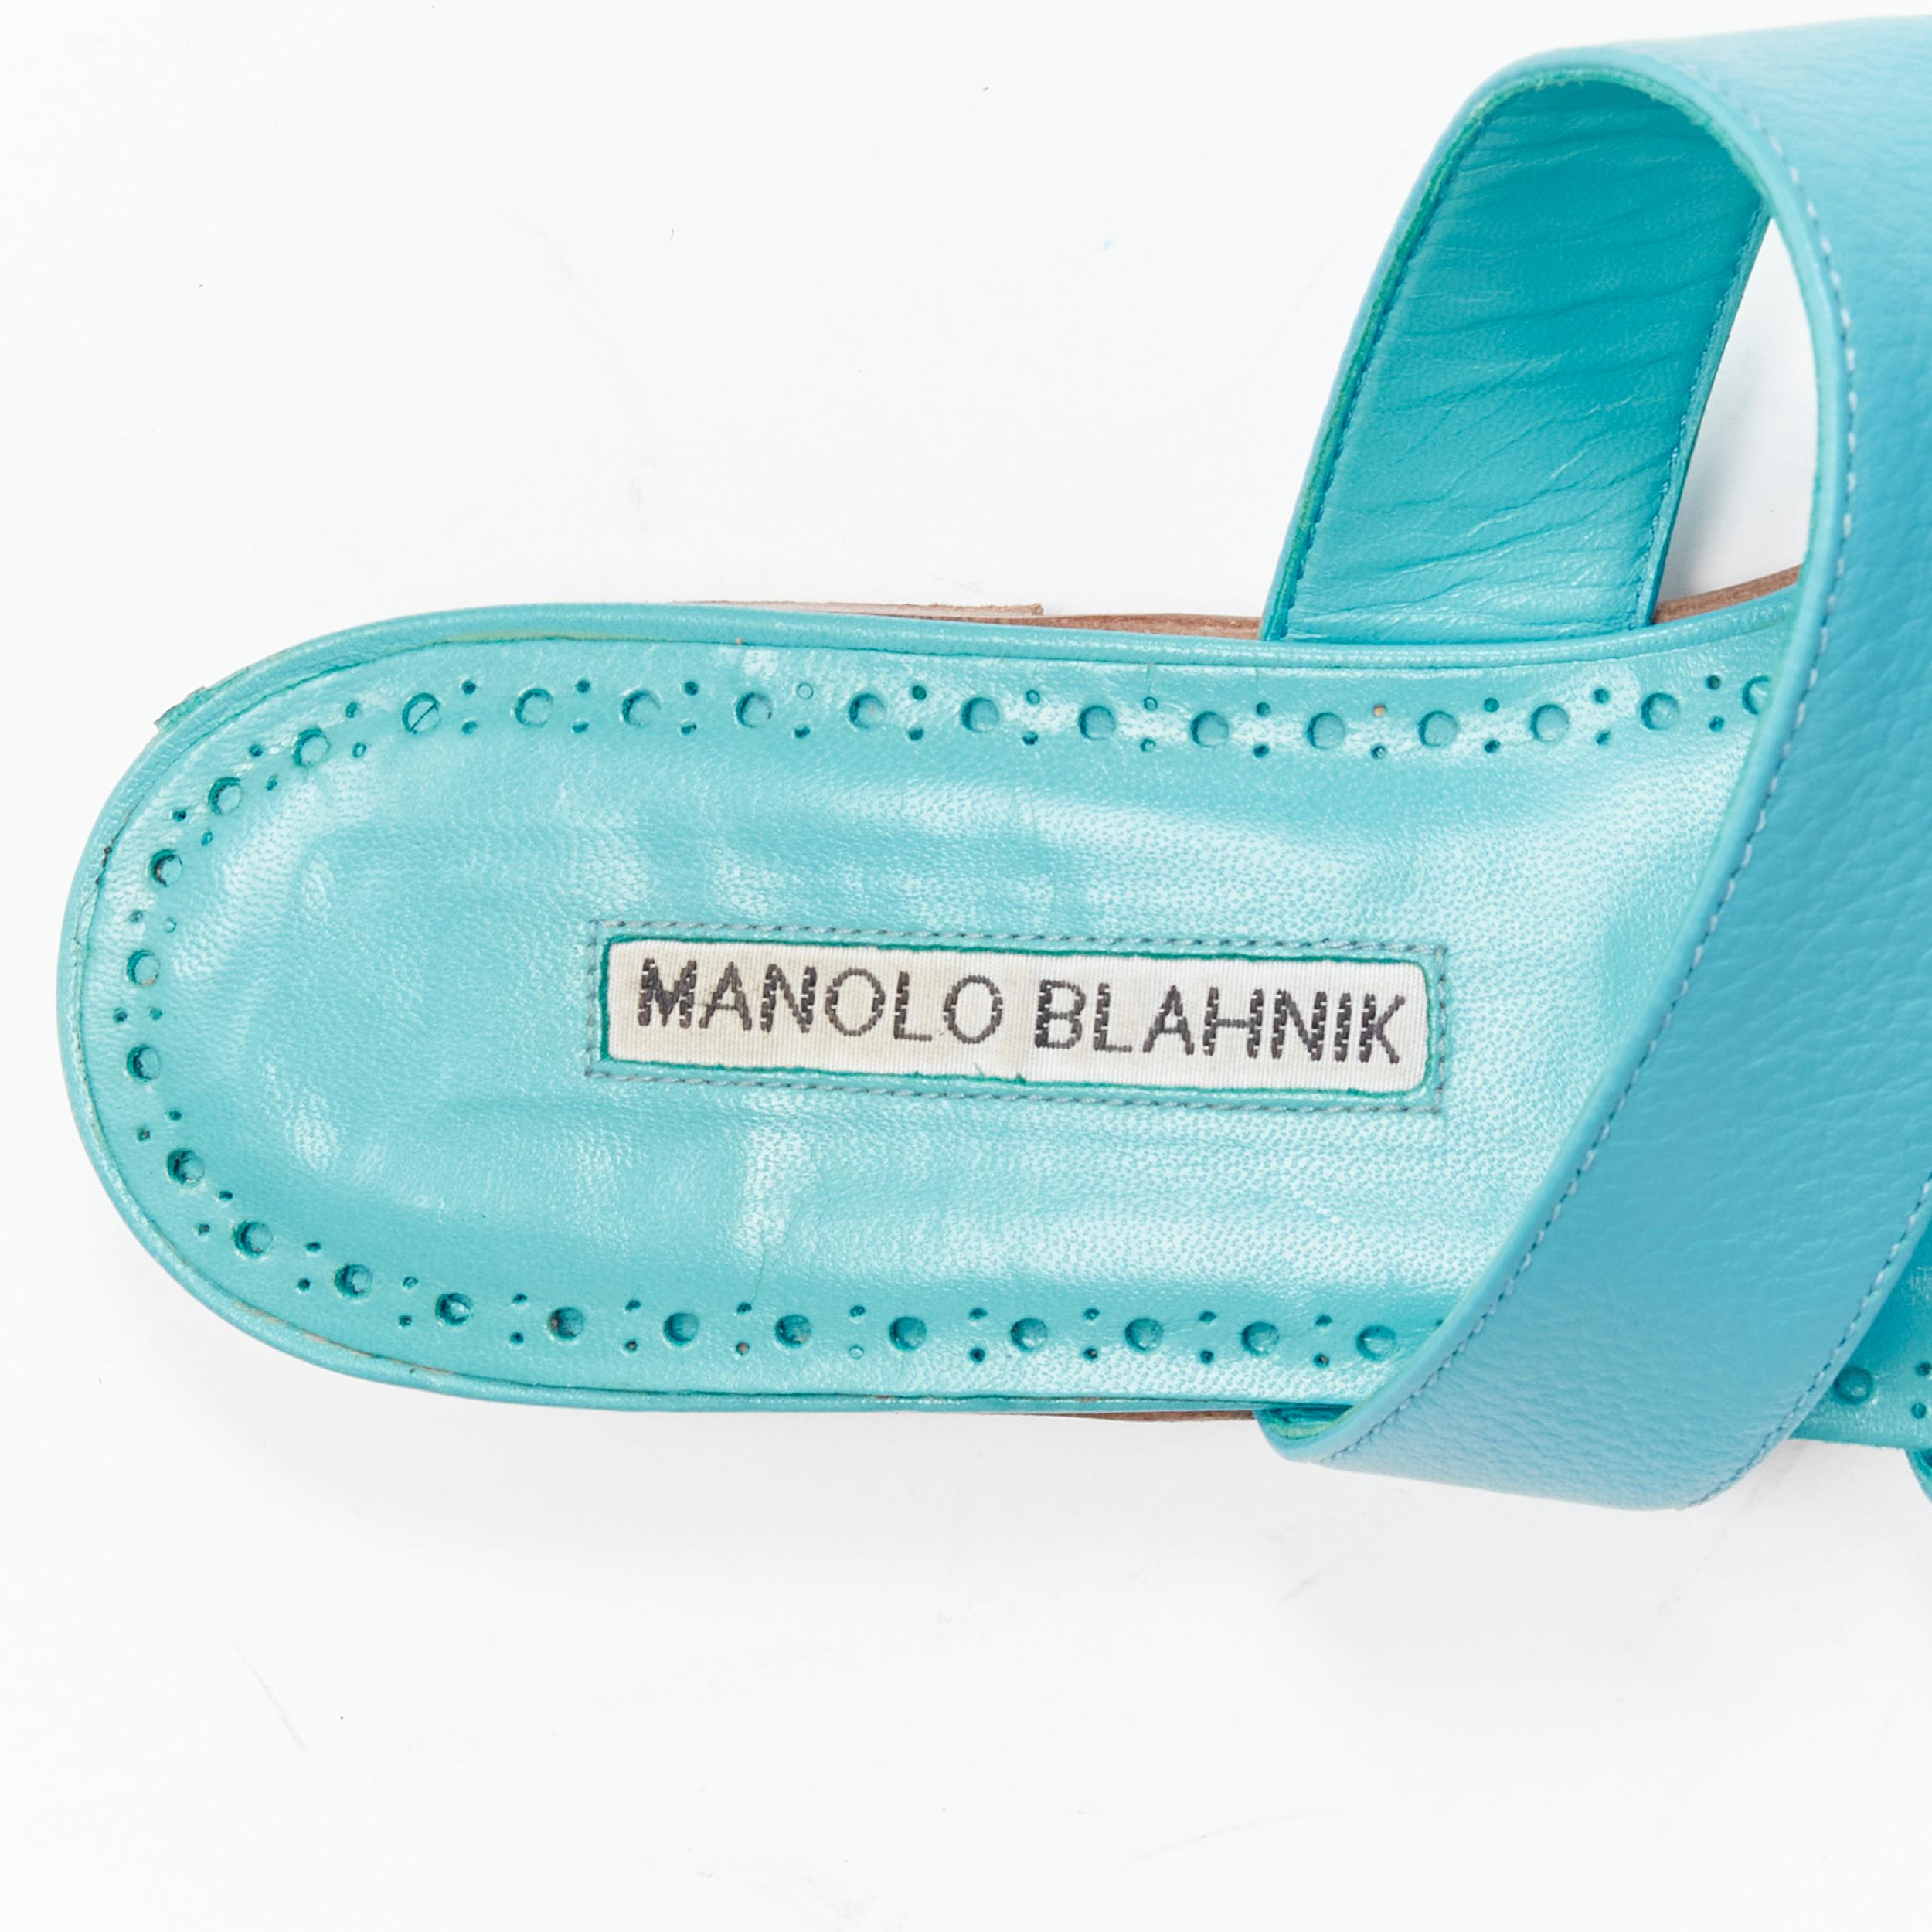 MANOLO BLAHNIK teal blue toe ring crisscross leather strappy sandals EU37.5 For Sale 3